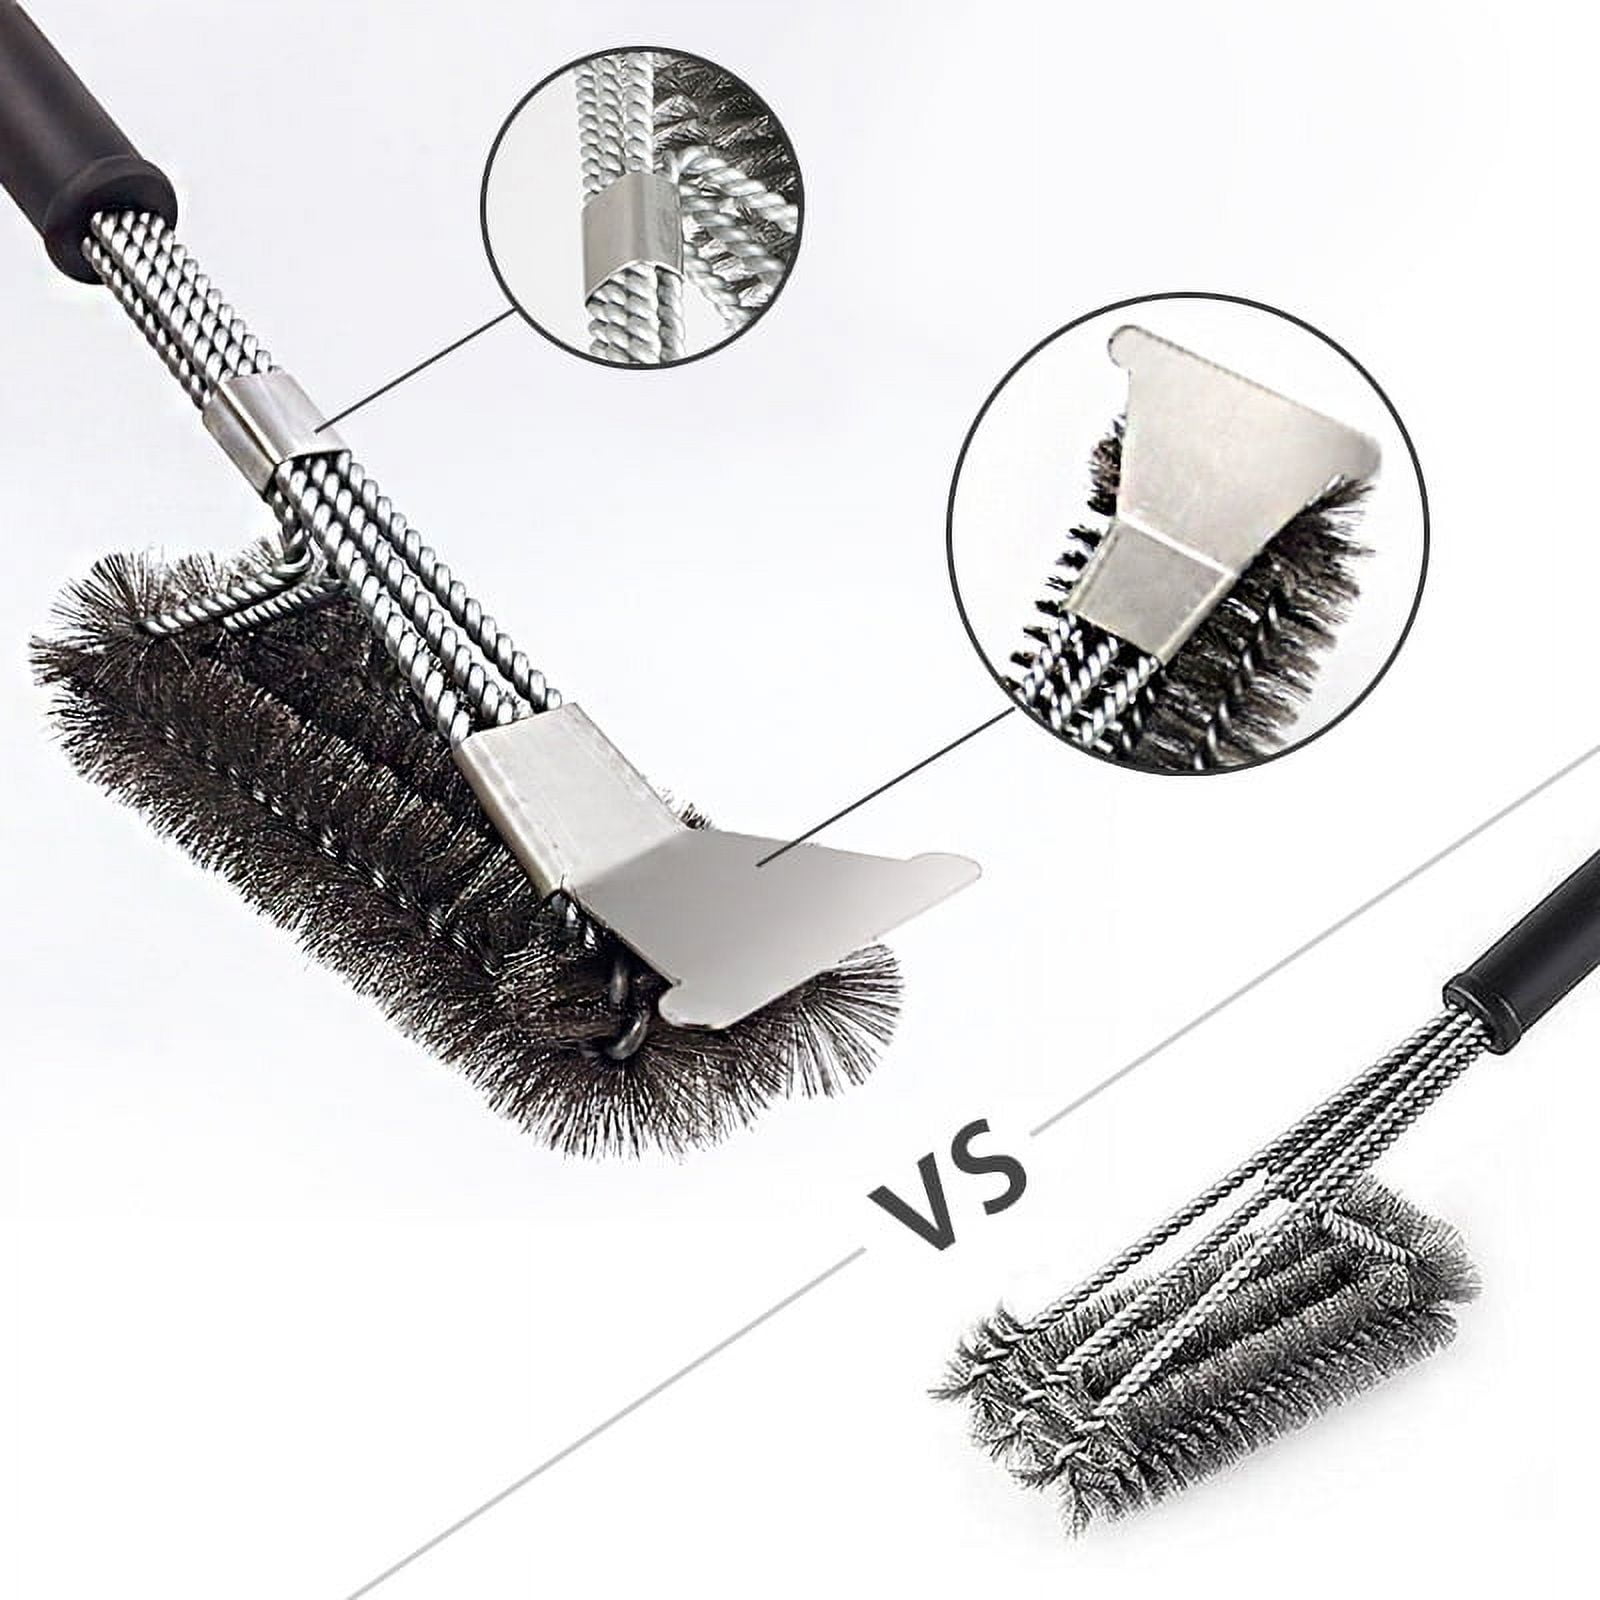  18 Heat Boss Grill Brush and Scraper - 3 Rows of Reinforced  Stainless Steel Bristles - Best Heavy Duty Outdoor Grill Brush for All Grill  Types - Long 18 BBQ Grill